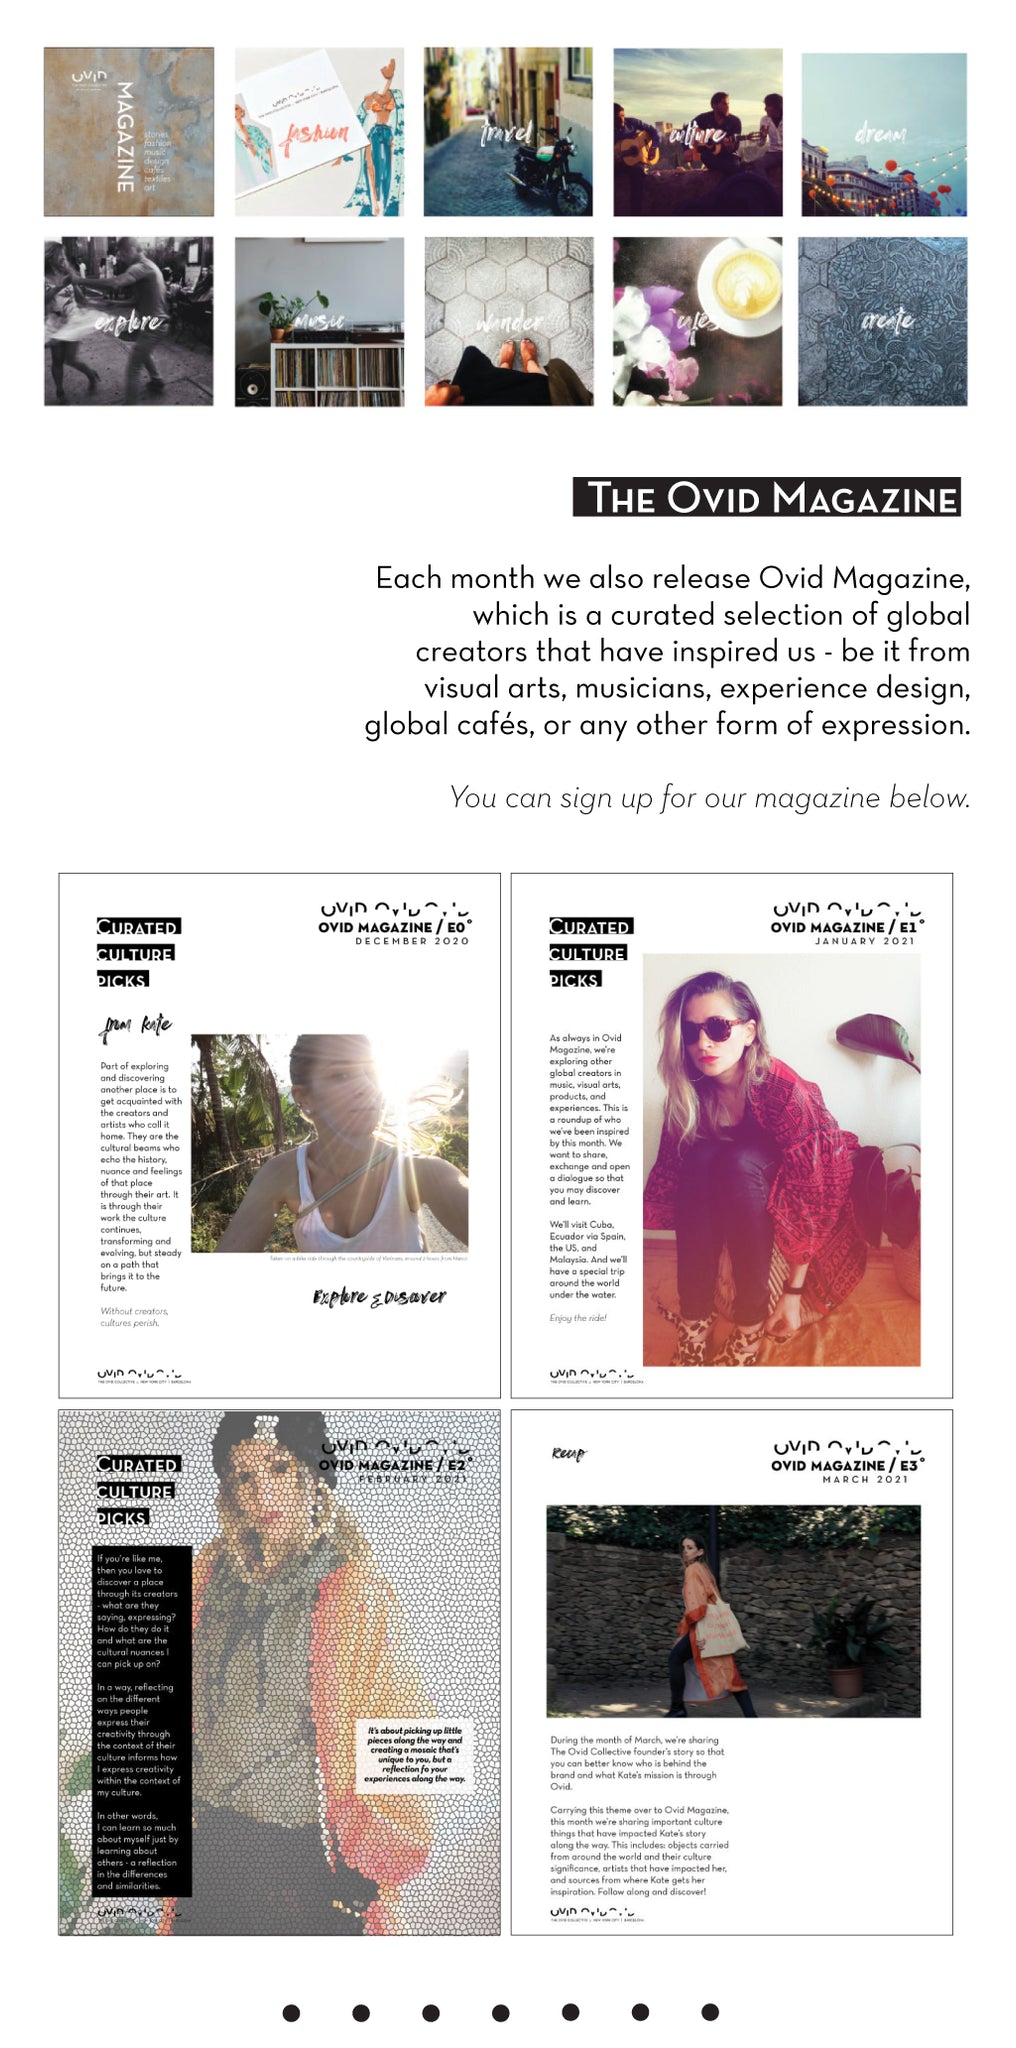 The Ovid Collective Culture Magazine about world creators, artists and musicians